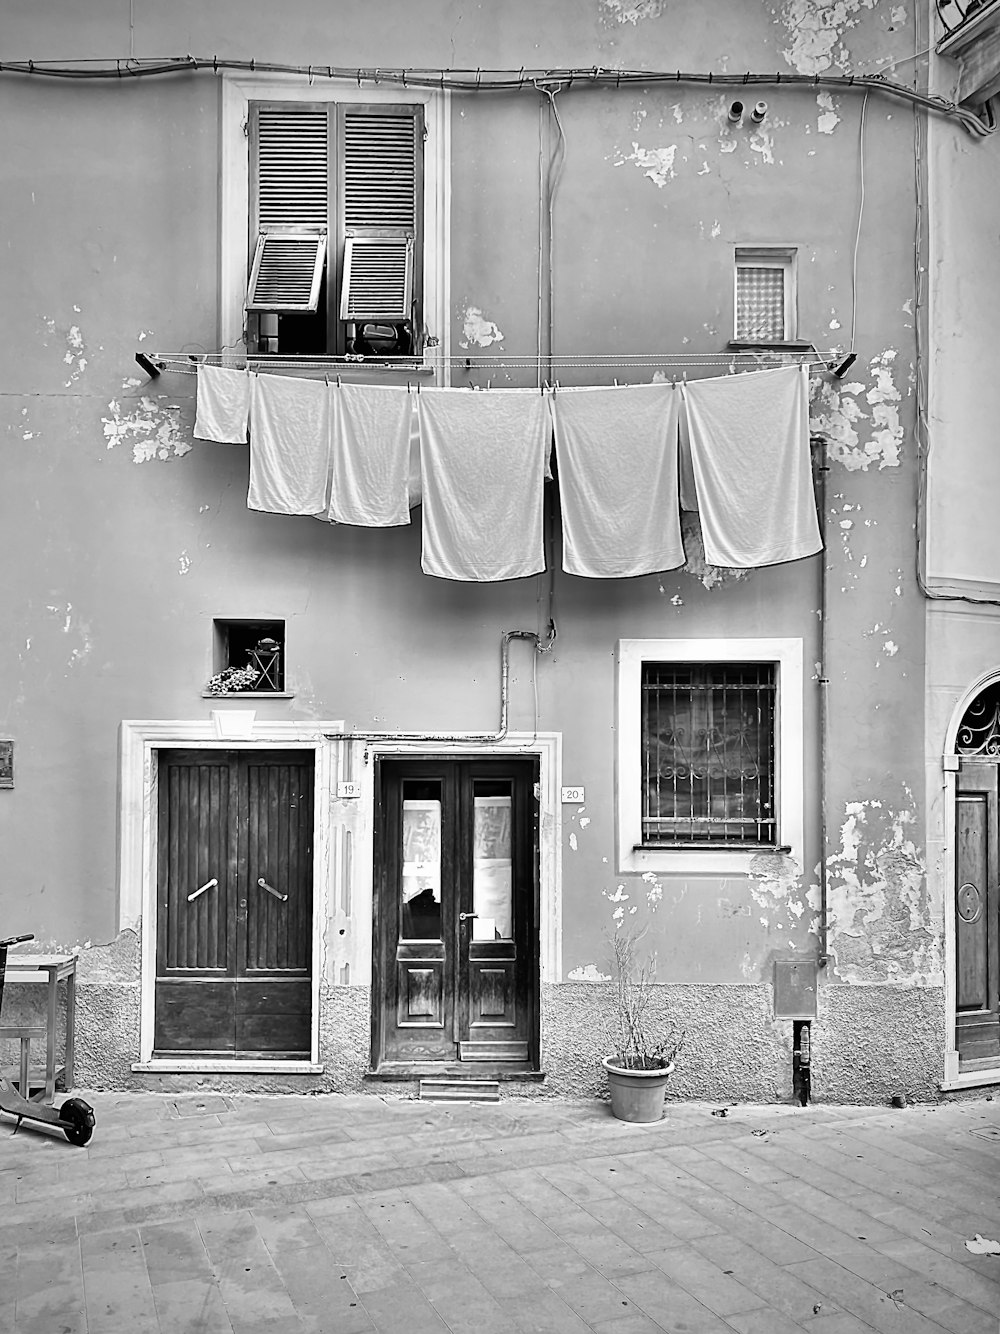 a black and white photo of a building with clothes hanging out to dry